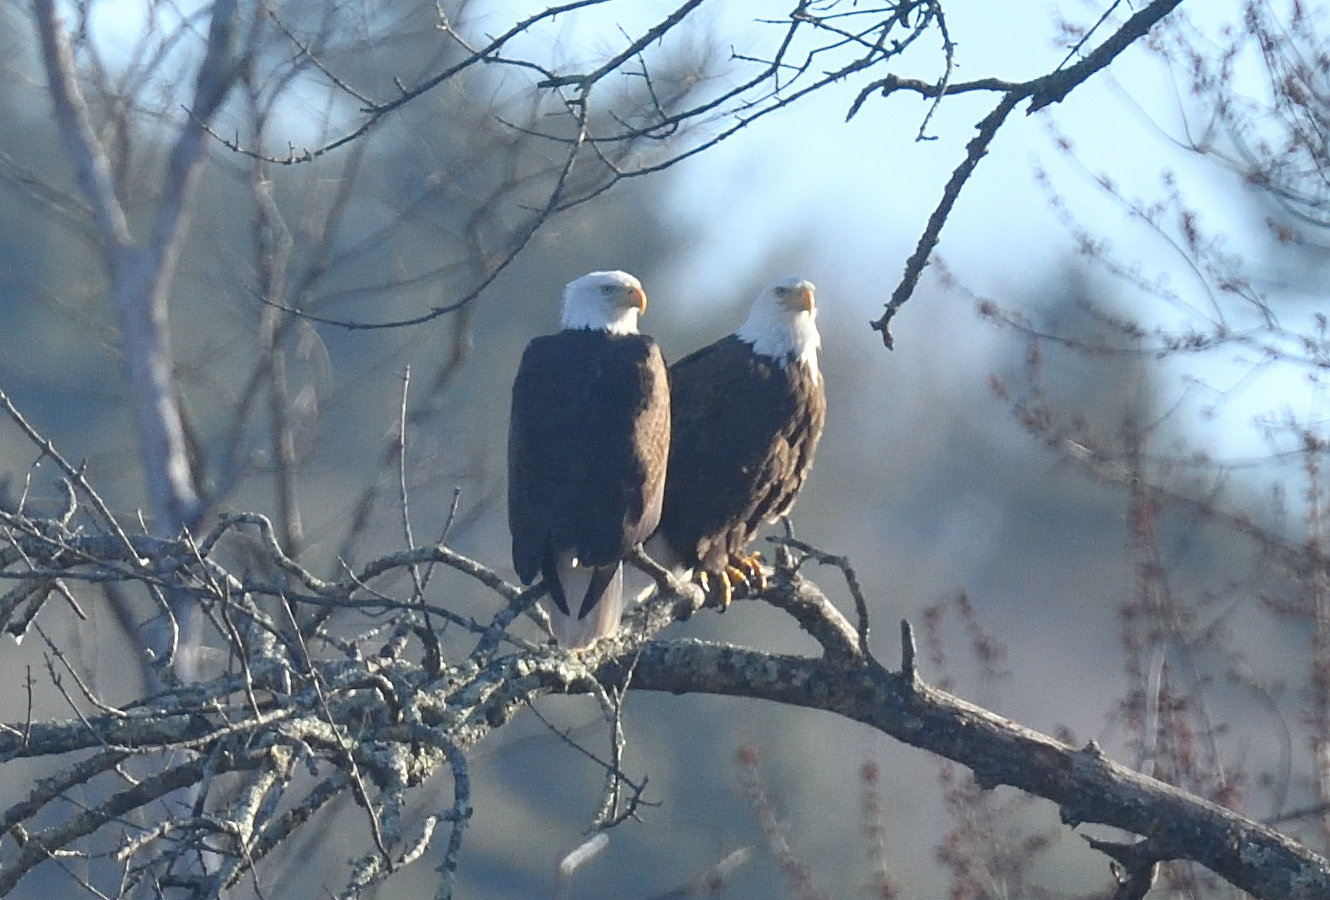 This pair is taking a rest from their aerobatics on a tree in which eagles are known for perching. Eagles in specific territories have favorite trees that they use time and time again. Even if the eagles have to move to a new nest tree due to tree or nest damage from a storm, they will build a new nest in a suitable tree nearby. They will also continue to use their favorite perch trees within their territory. ....